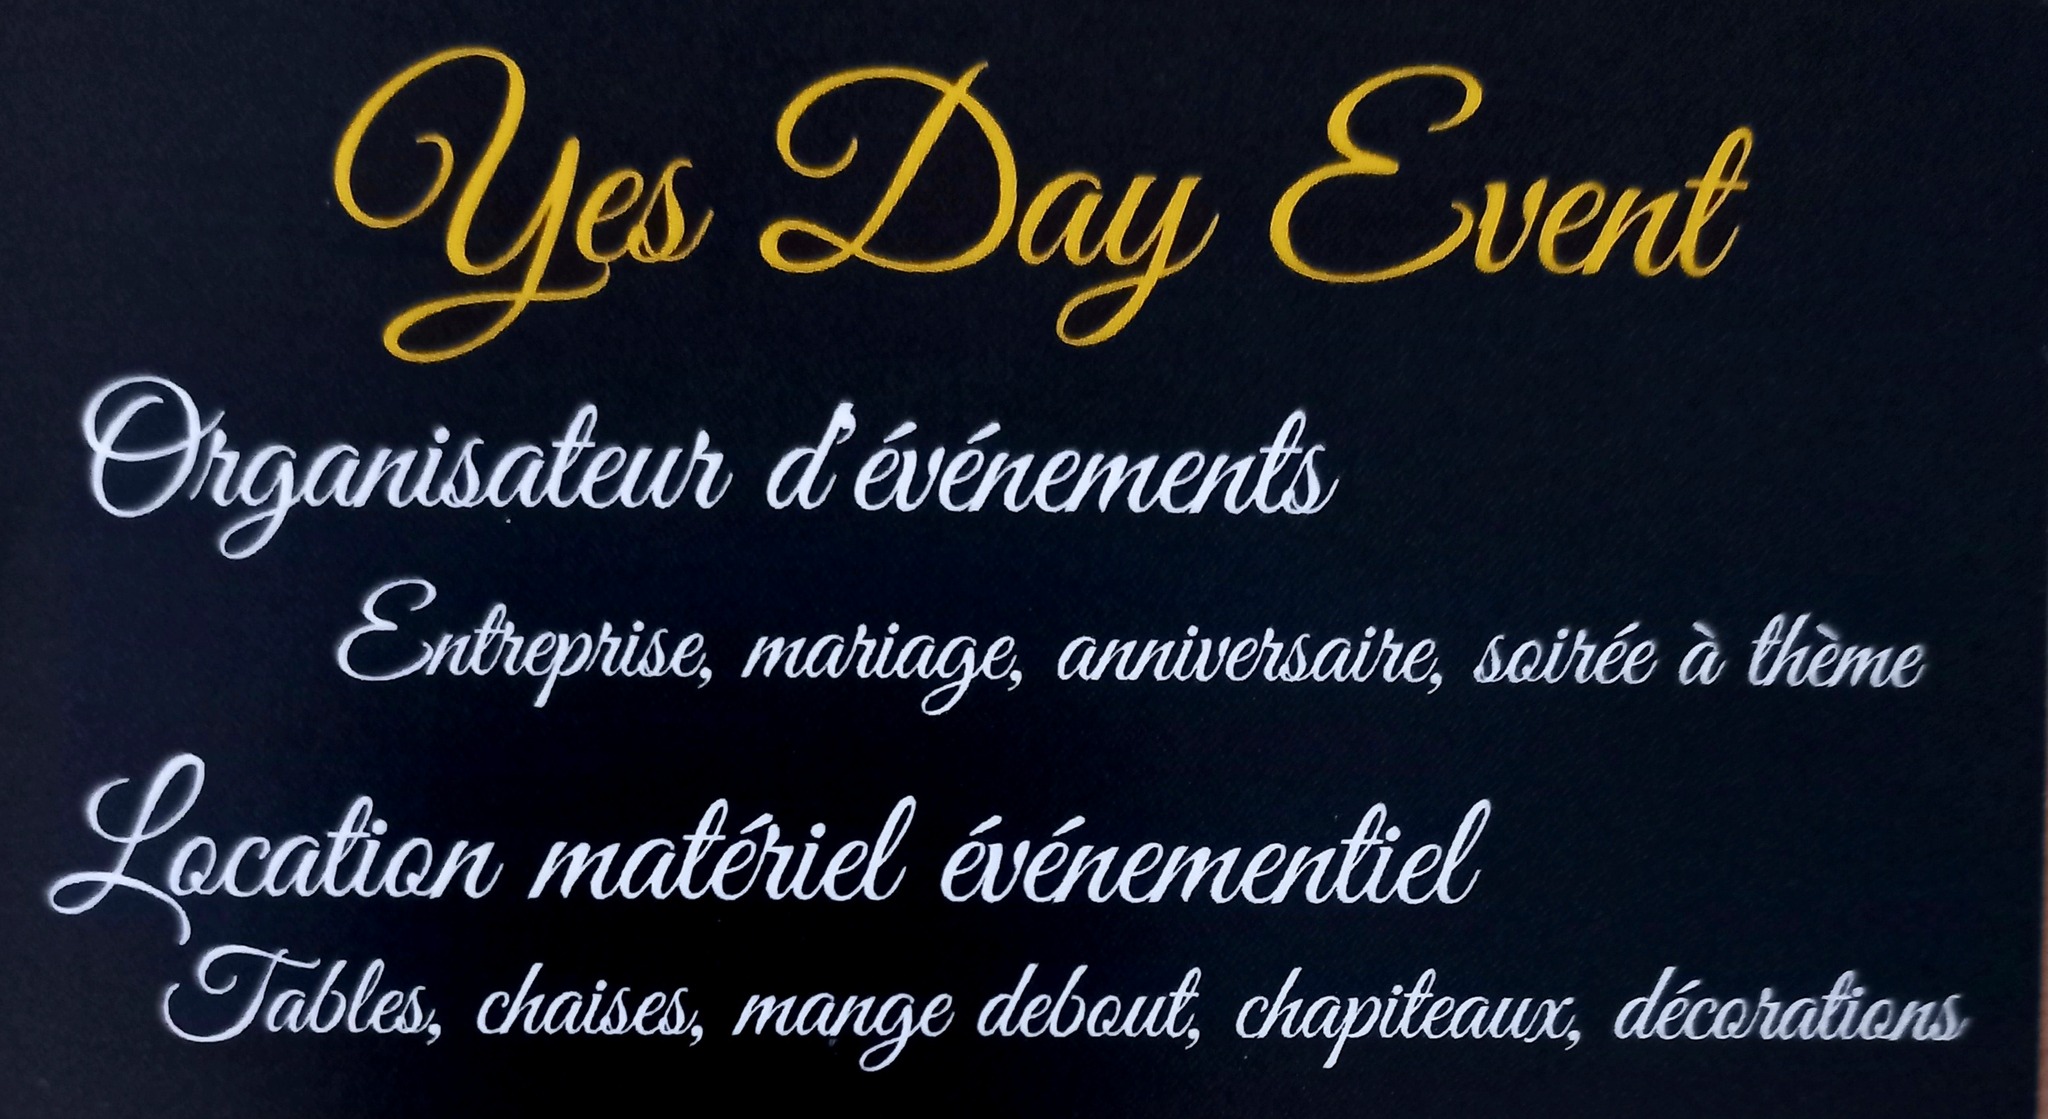 Yes day Event